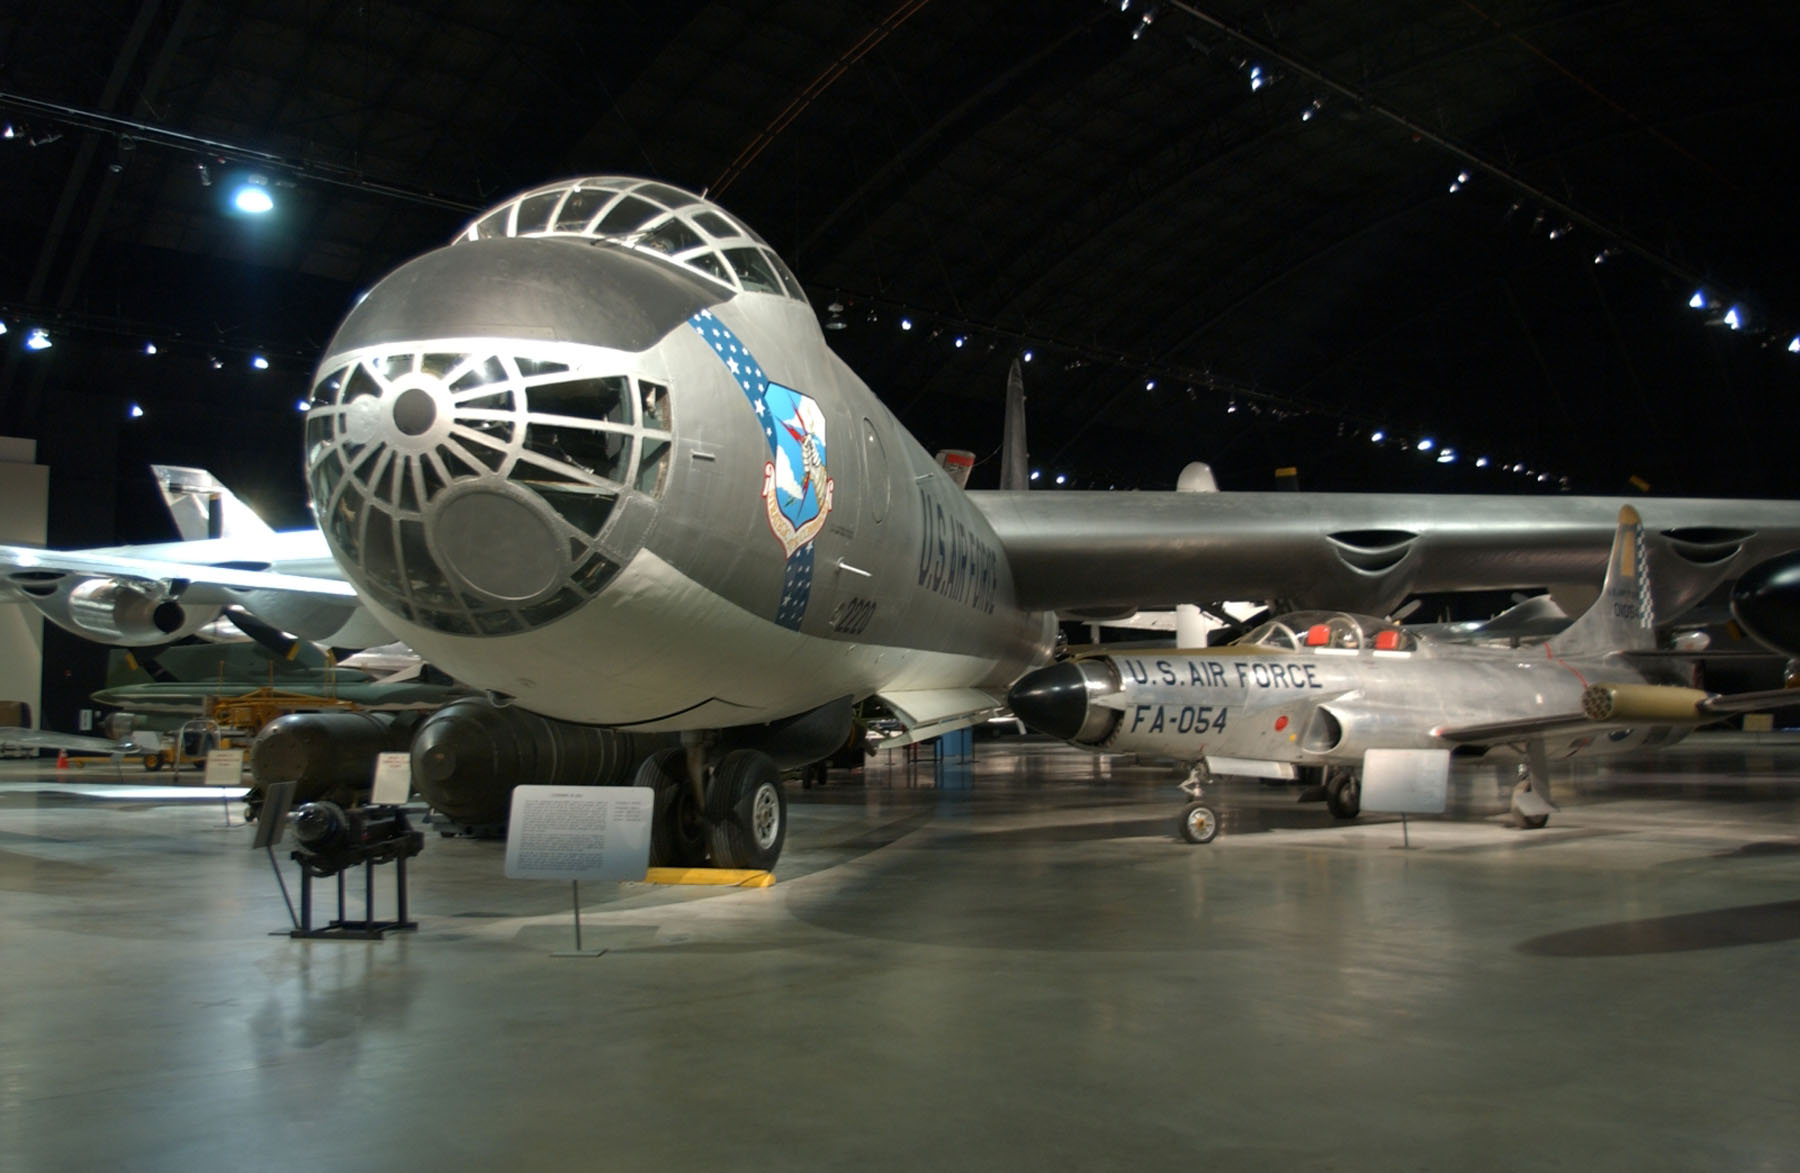 B-36 Peacemaker - United States Nuclear Forces